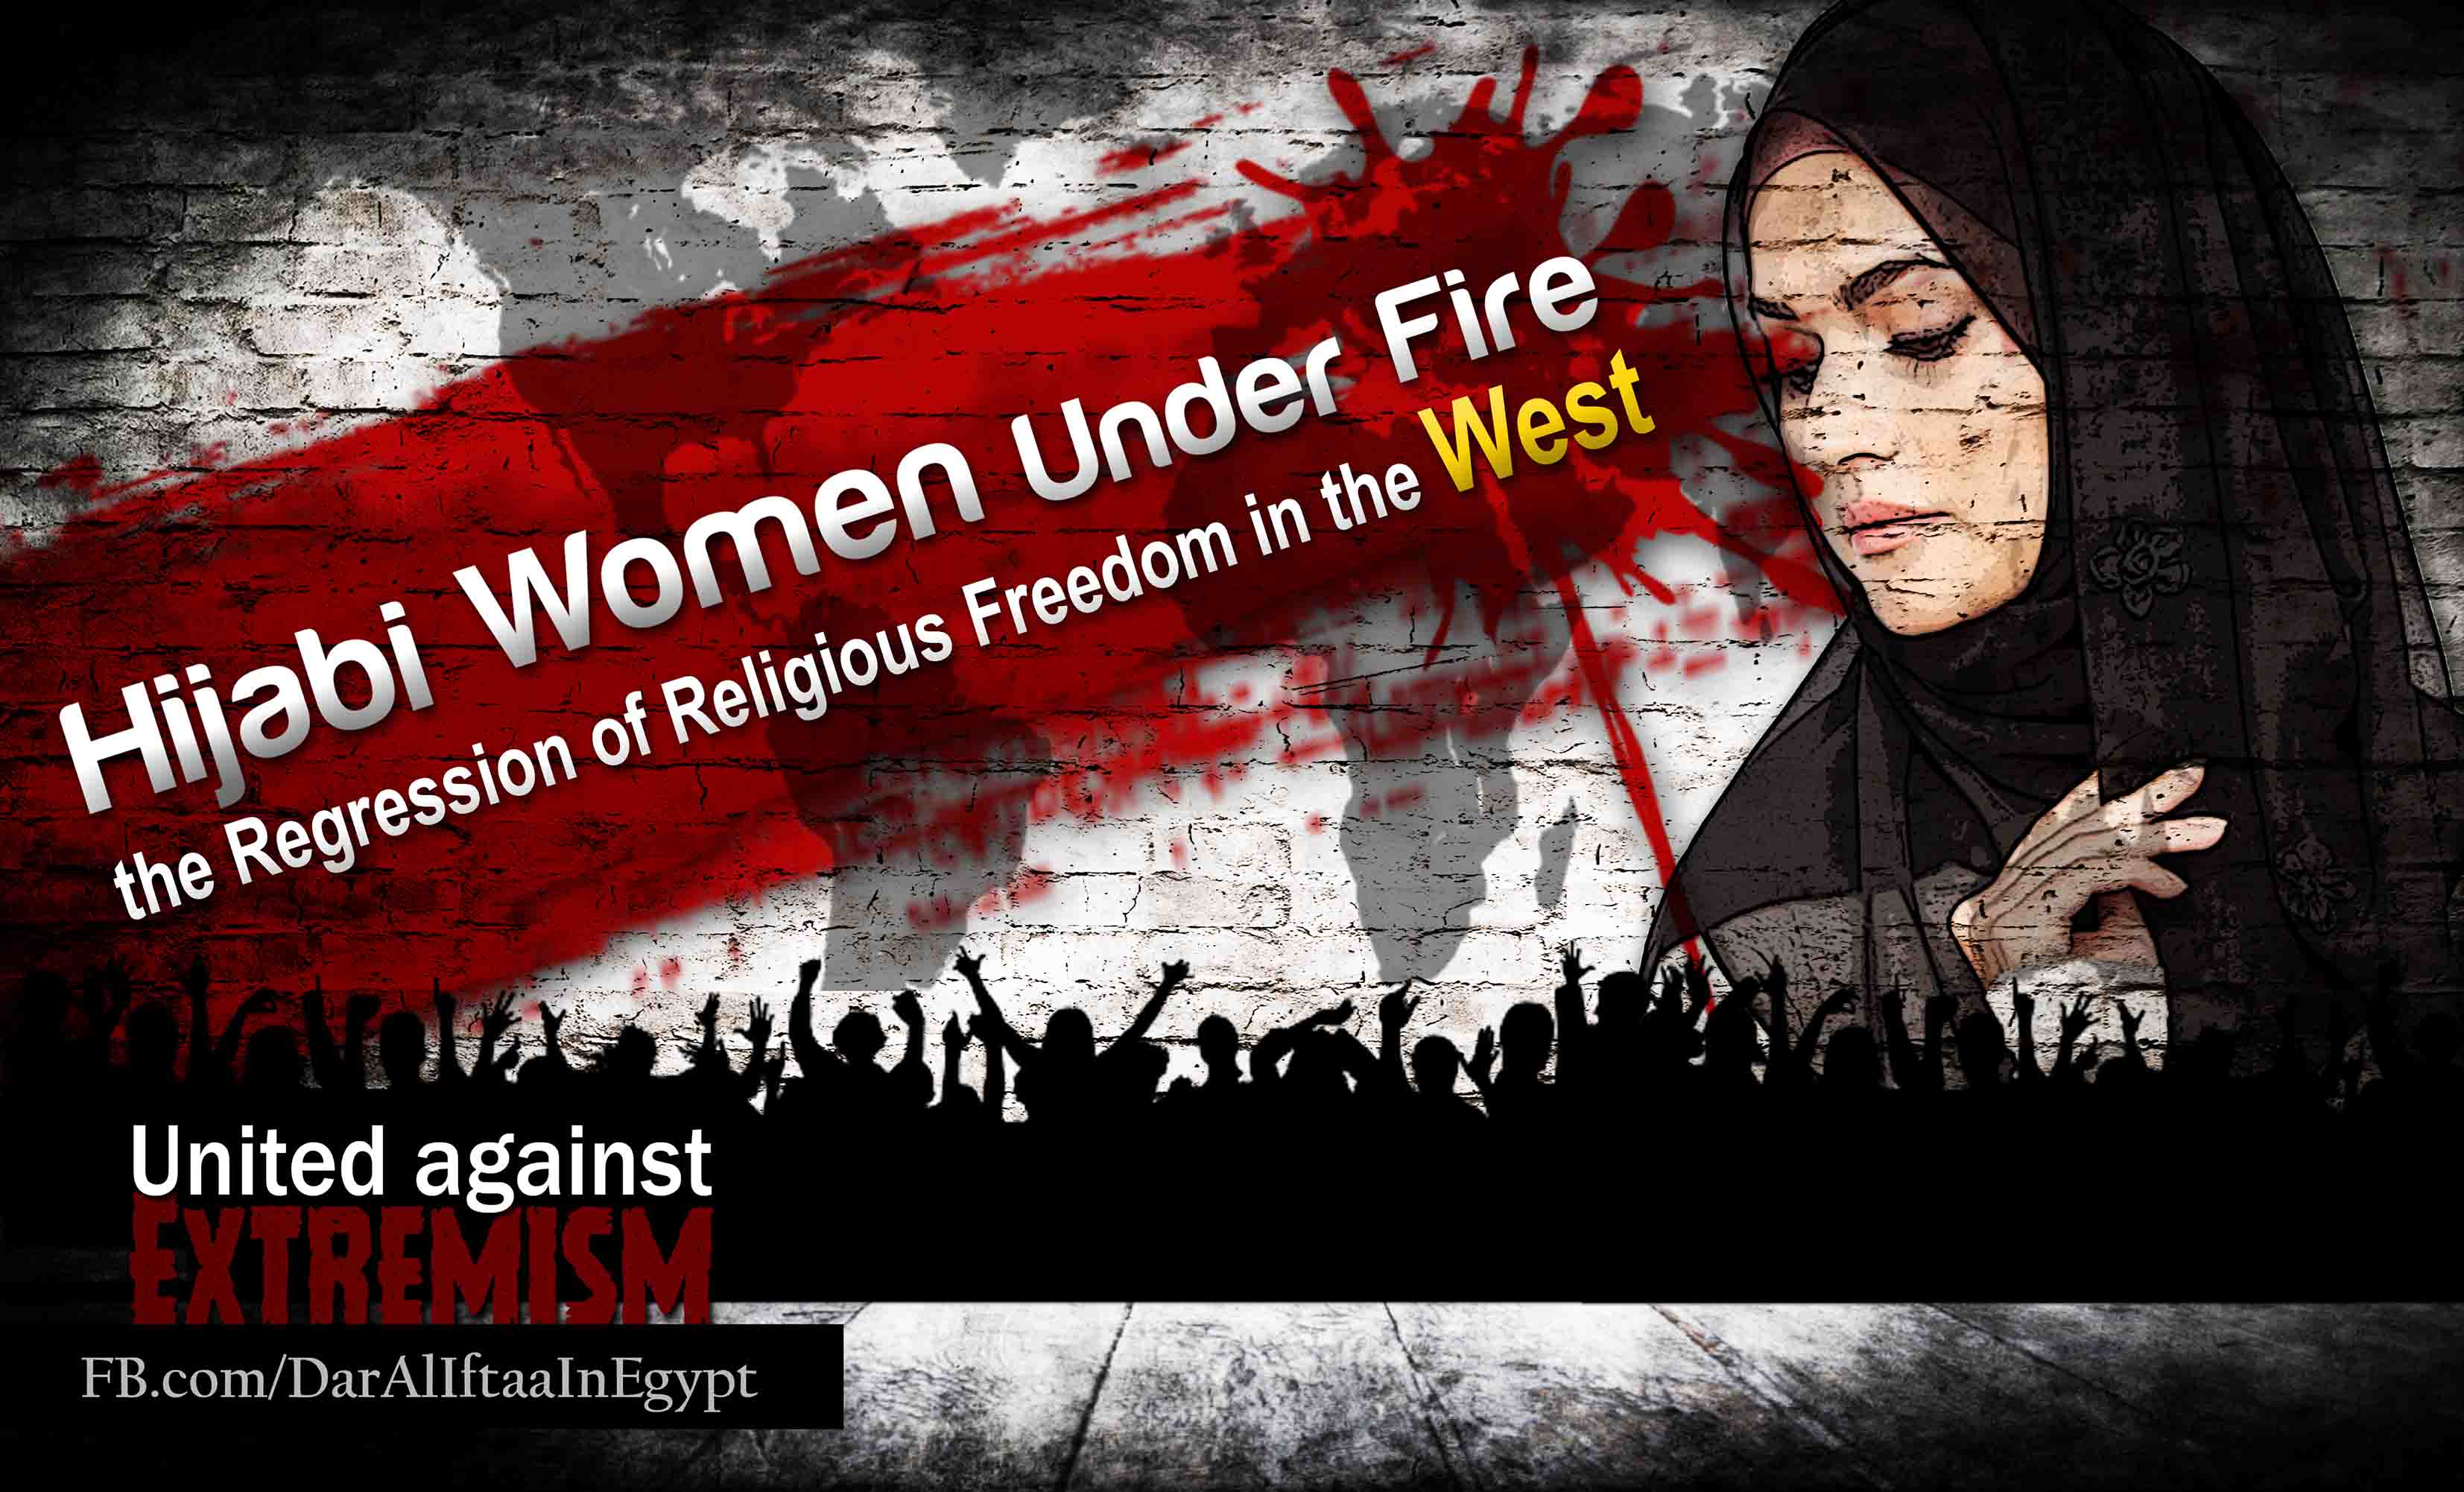 Hijabi Women under Fire: the Regression of Religious Freedom in the West